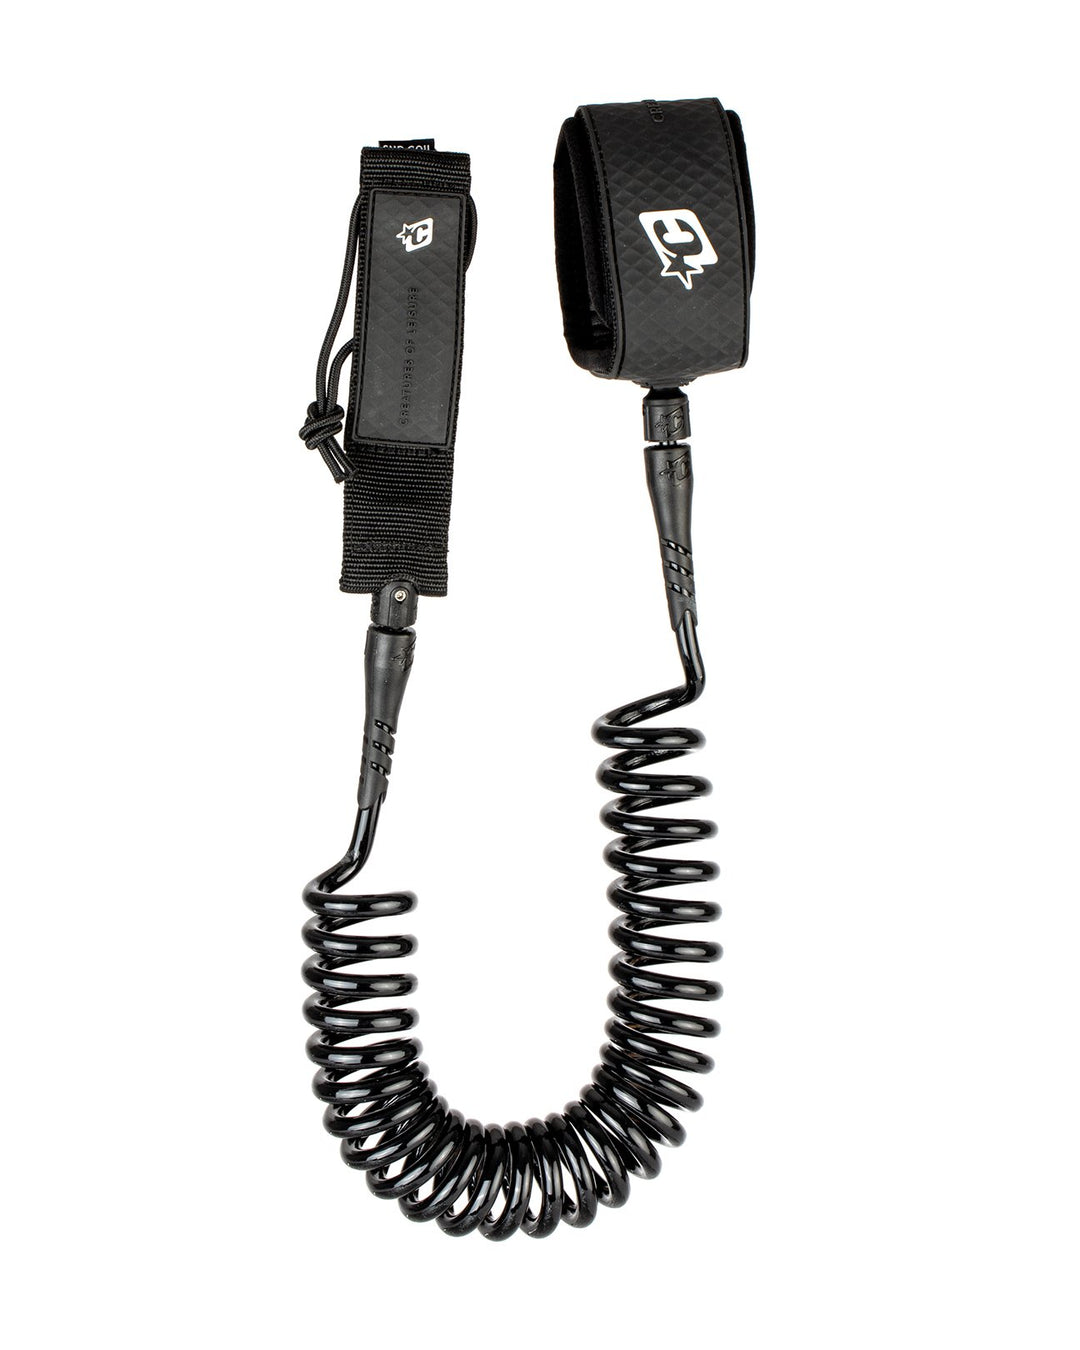 Reliance Sup Ankle Coil 10 Leash